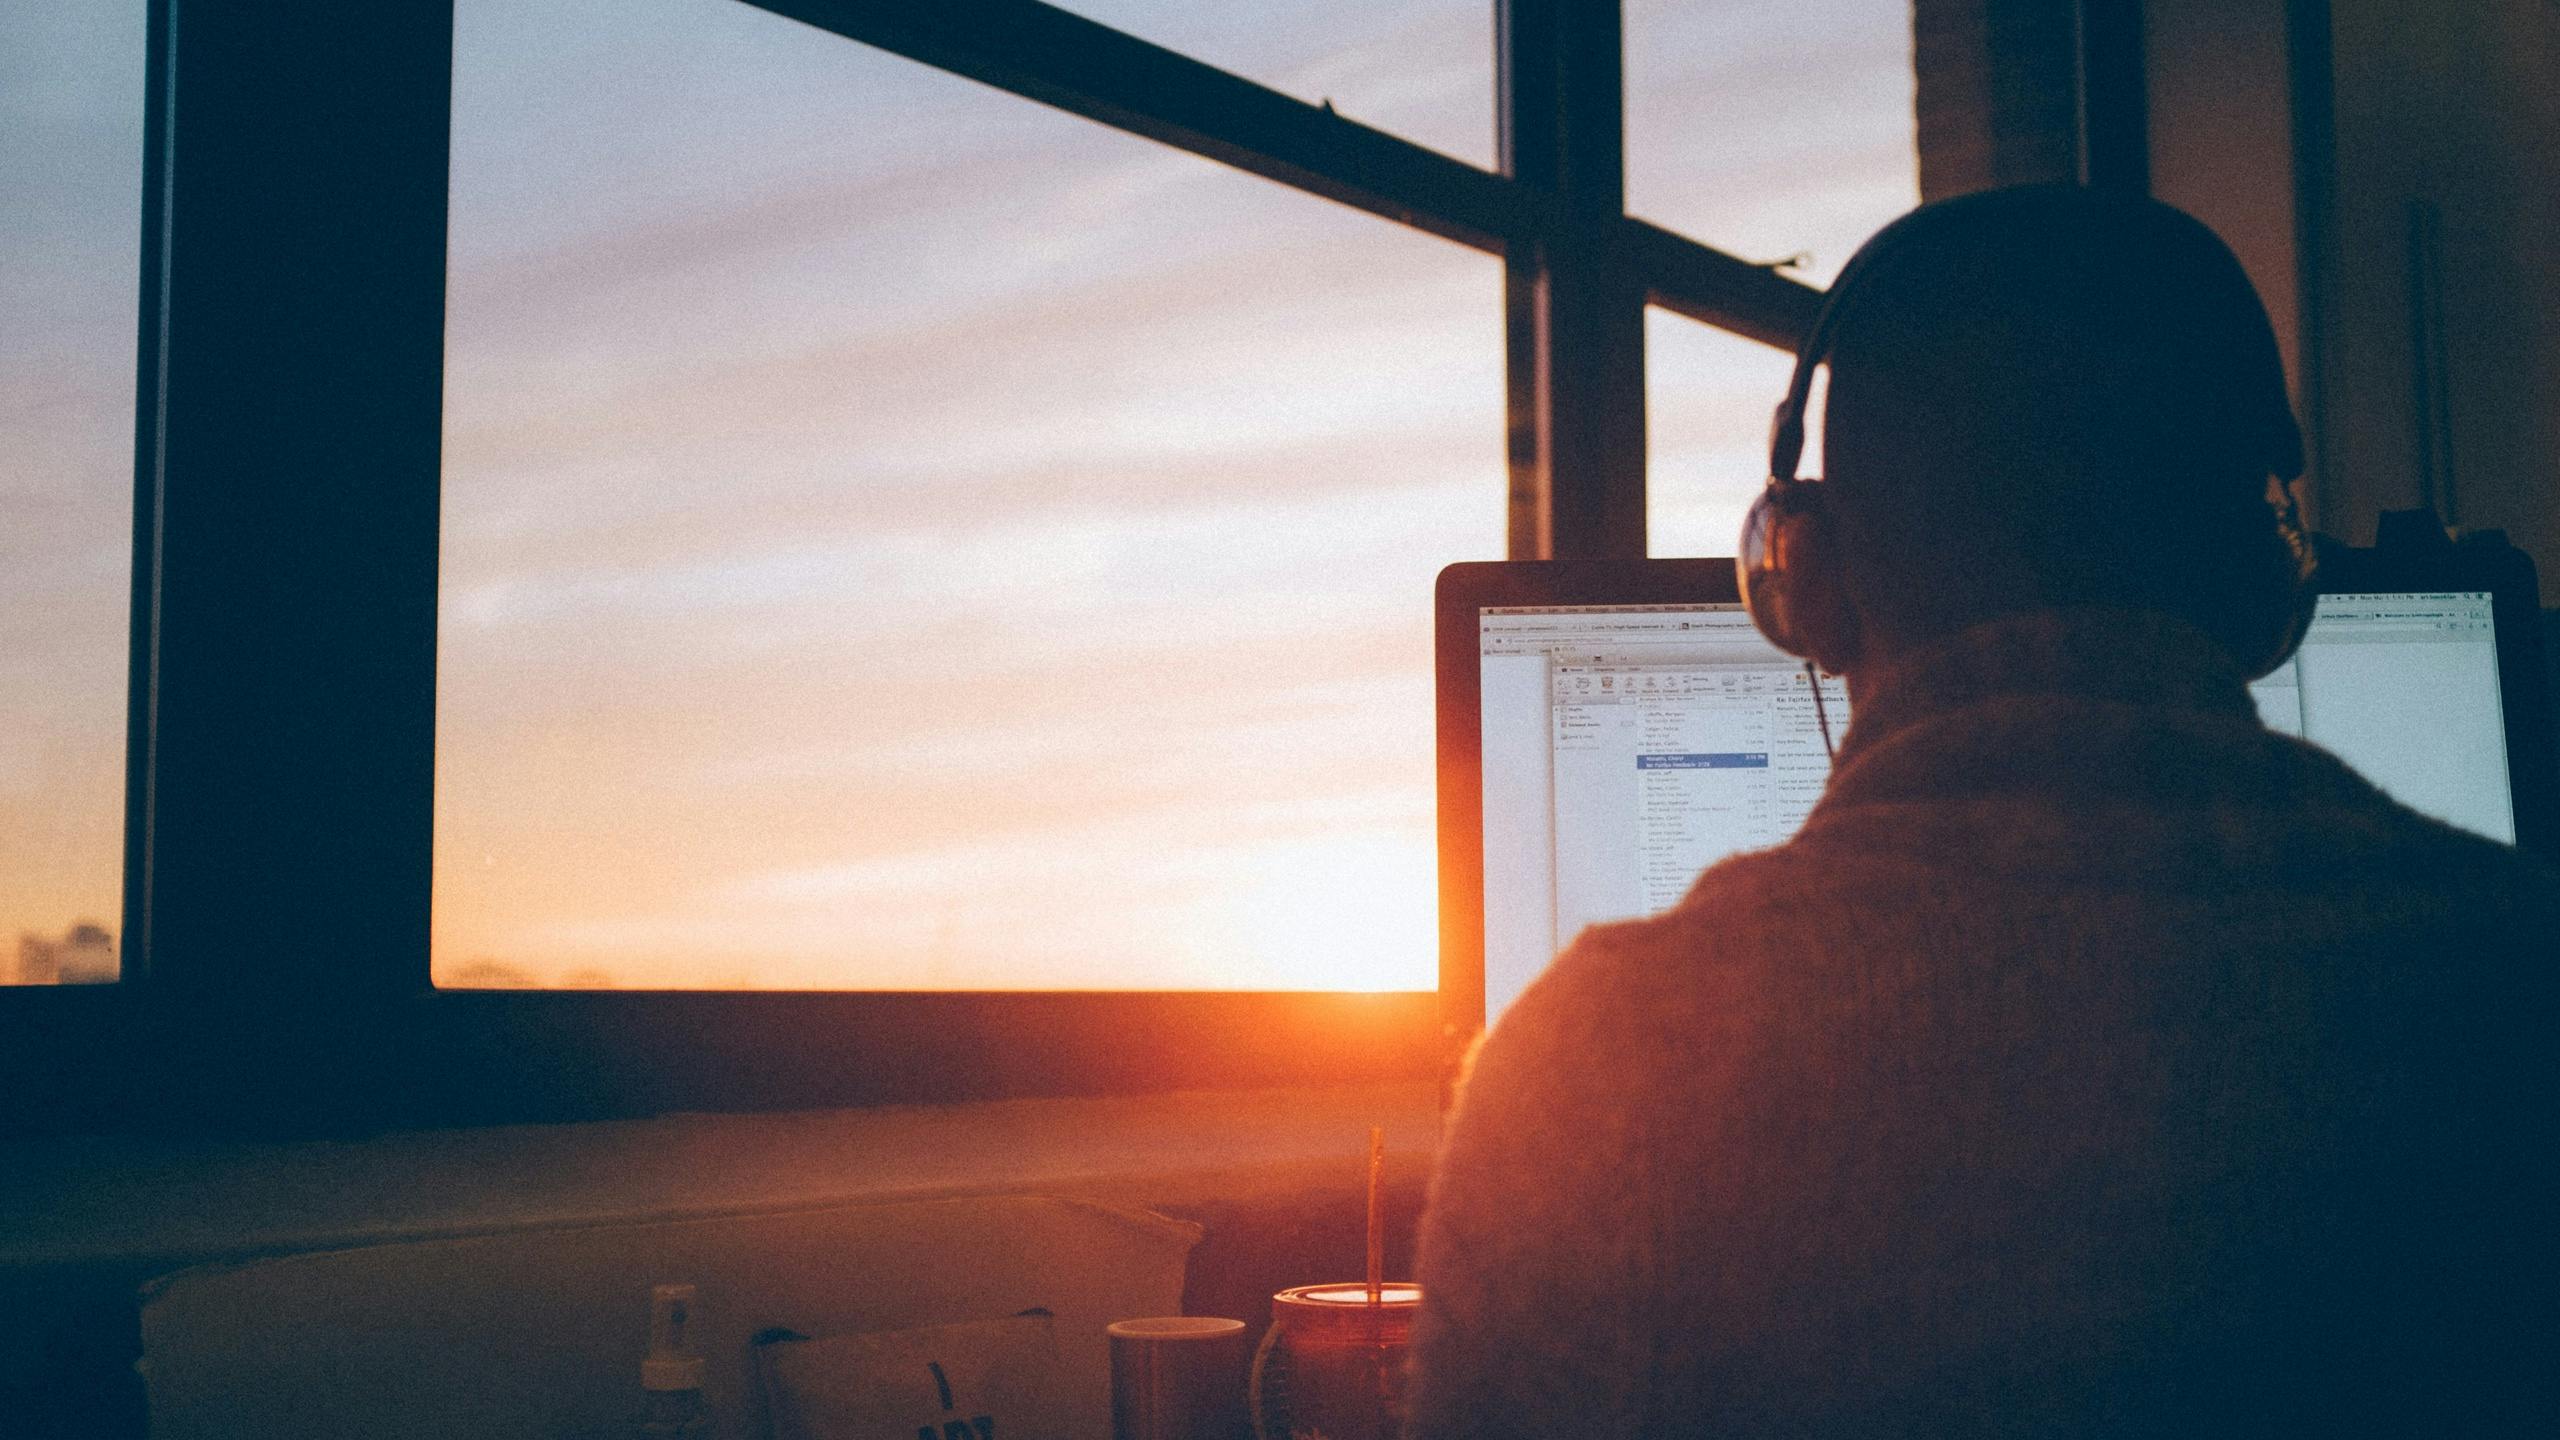 Man working on computer during sunset